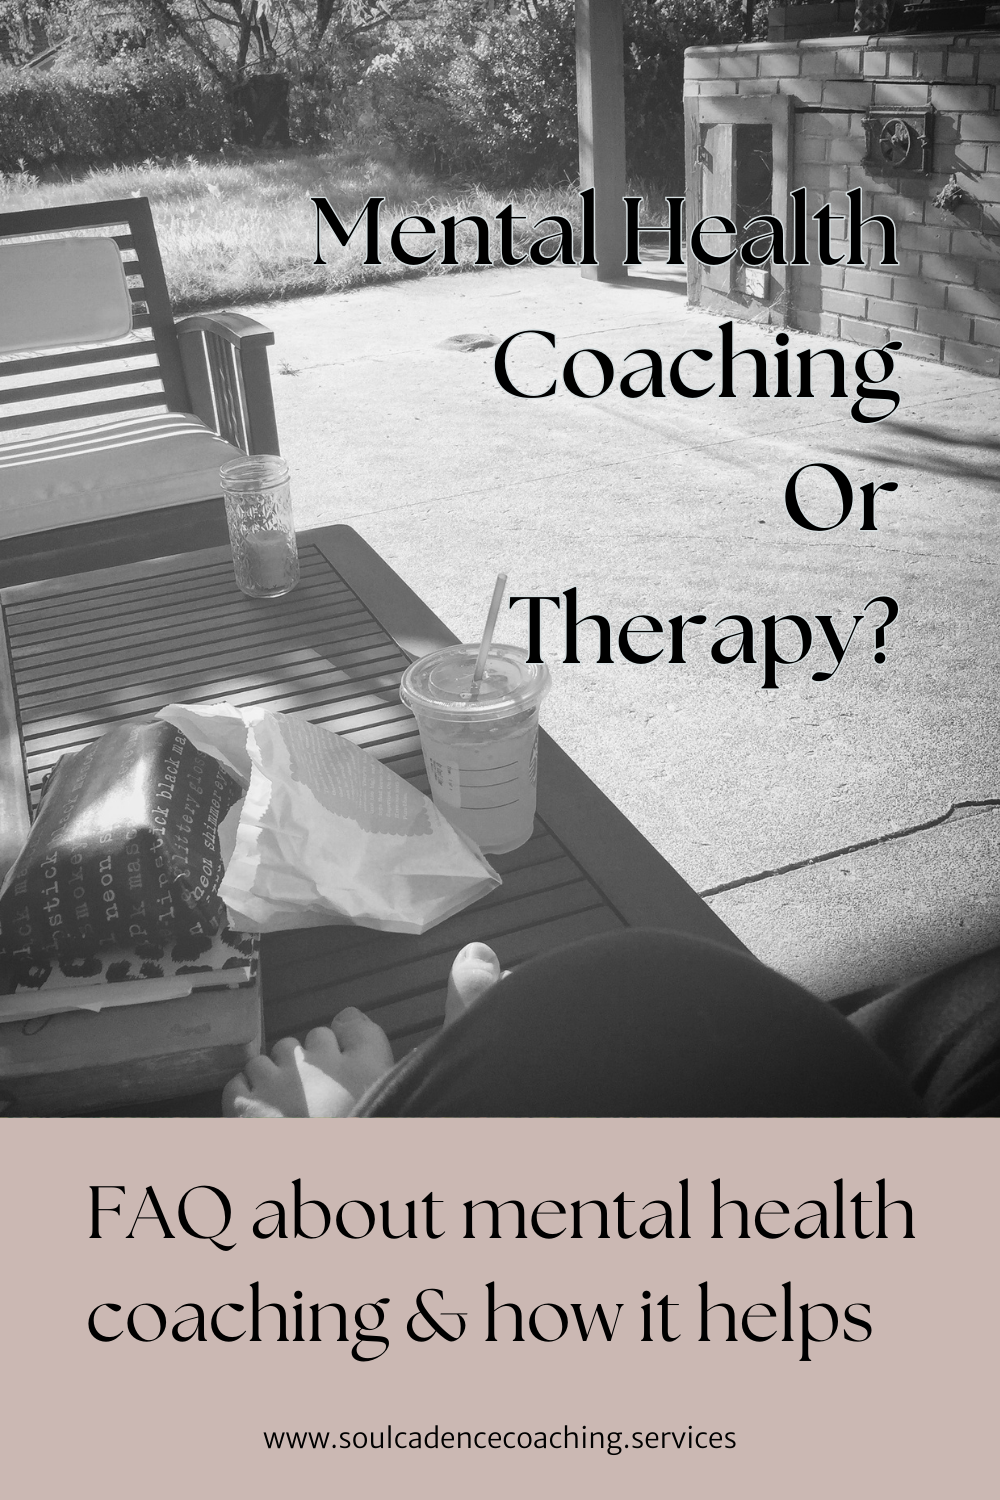 A black and white image of someone with their feet up, practicing self-care. The text focuses on mental health coaching and therapy and how these services help.